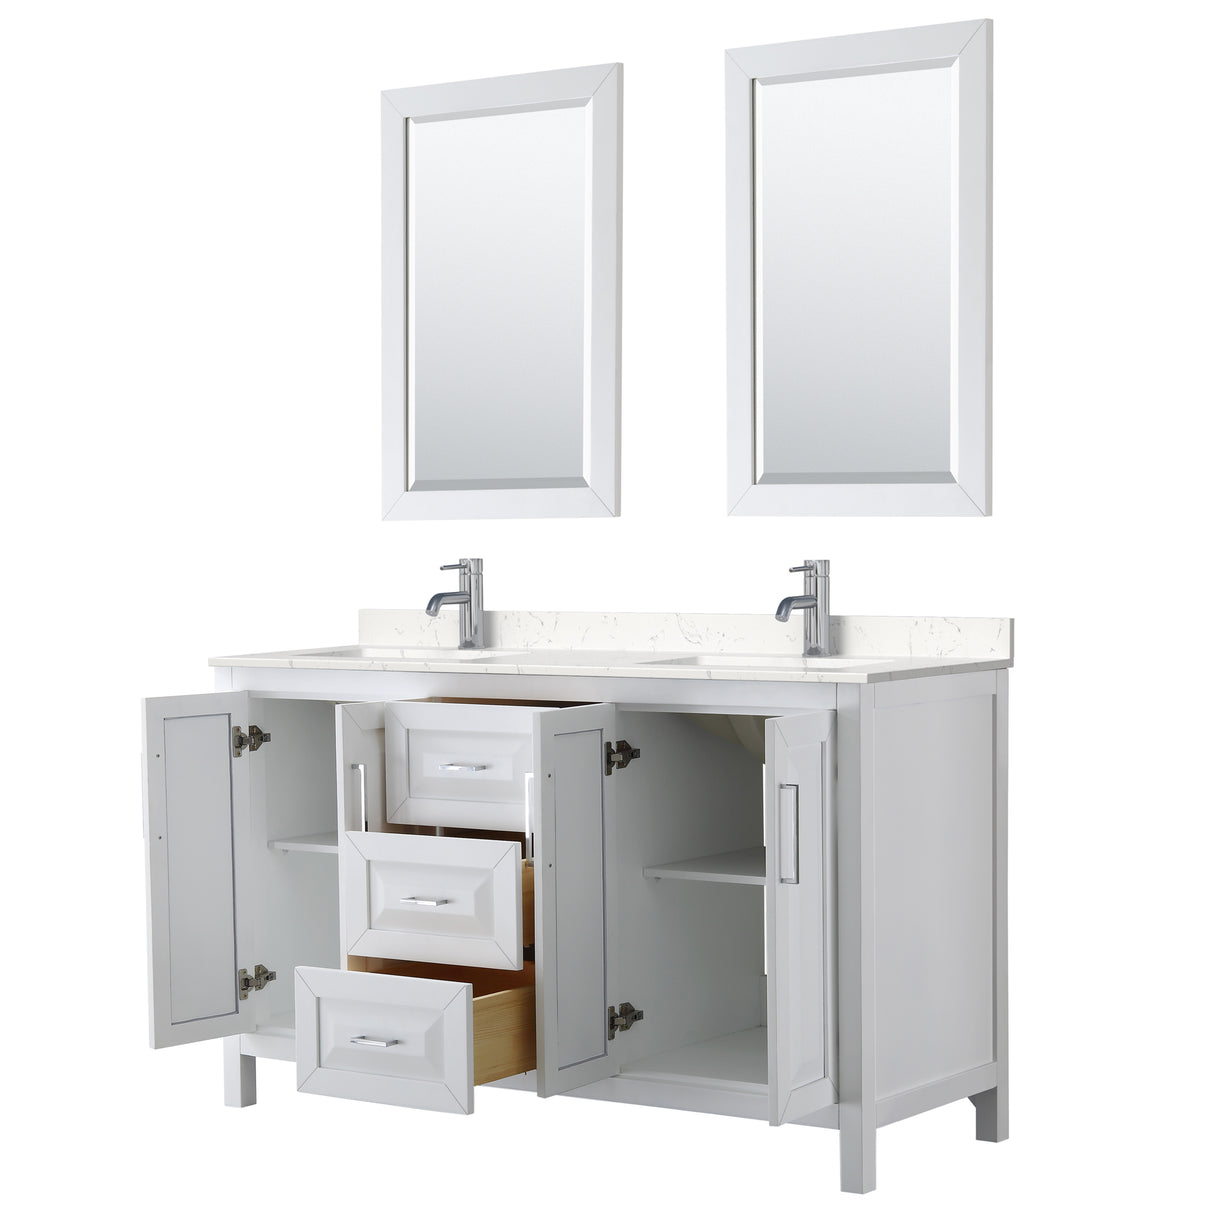 Daria 60 Inch Double Bathroom Vanity in White Carrara Cultured Marble Countertop Undermount Square Sinks 24 Inch Mirrors